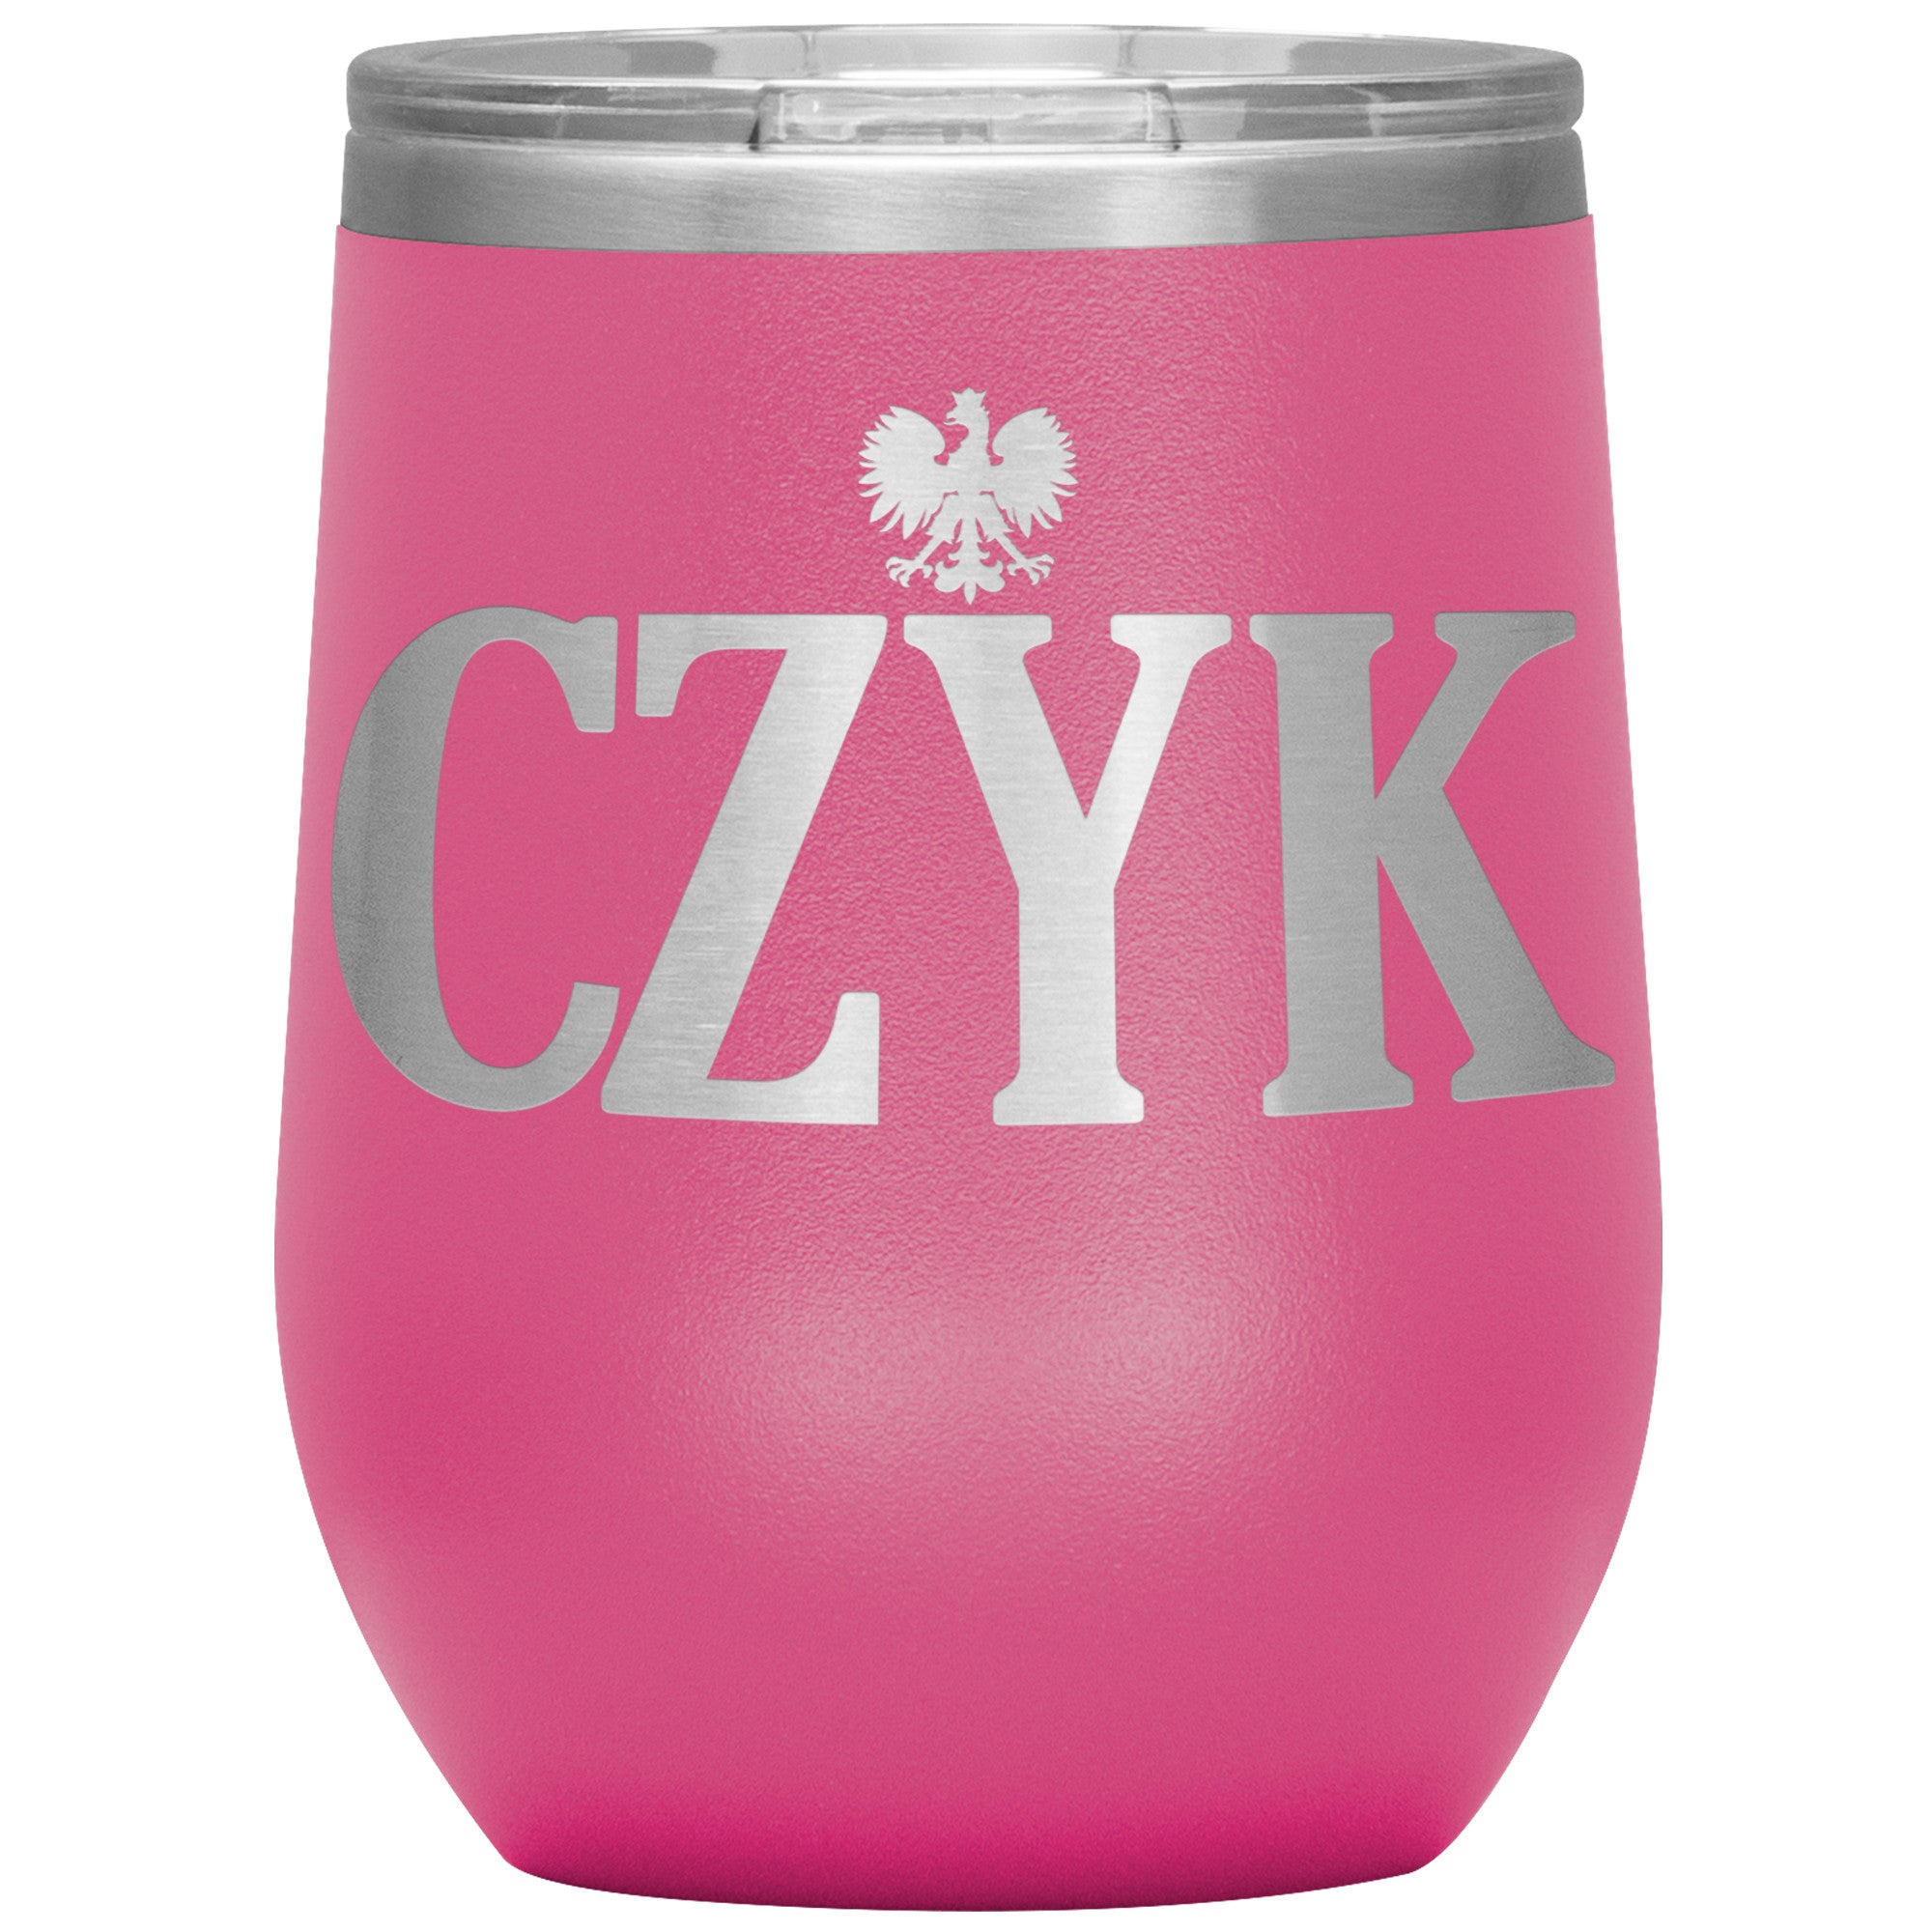 Polish Surnames Ending In CZYK Insulated Wine Tumbler Tumblers teelaunch Pink  